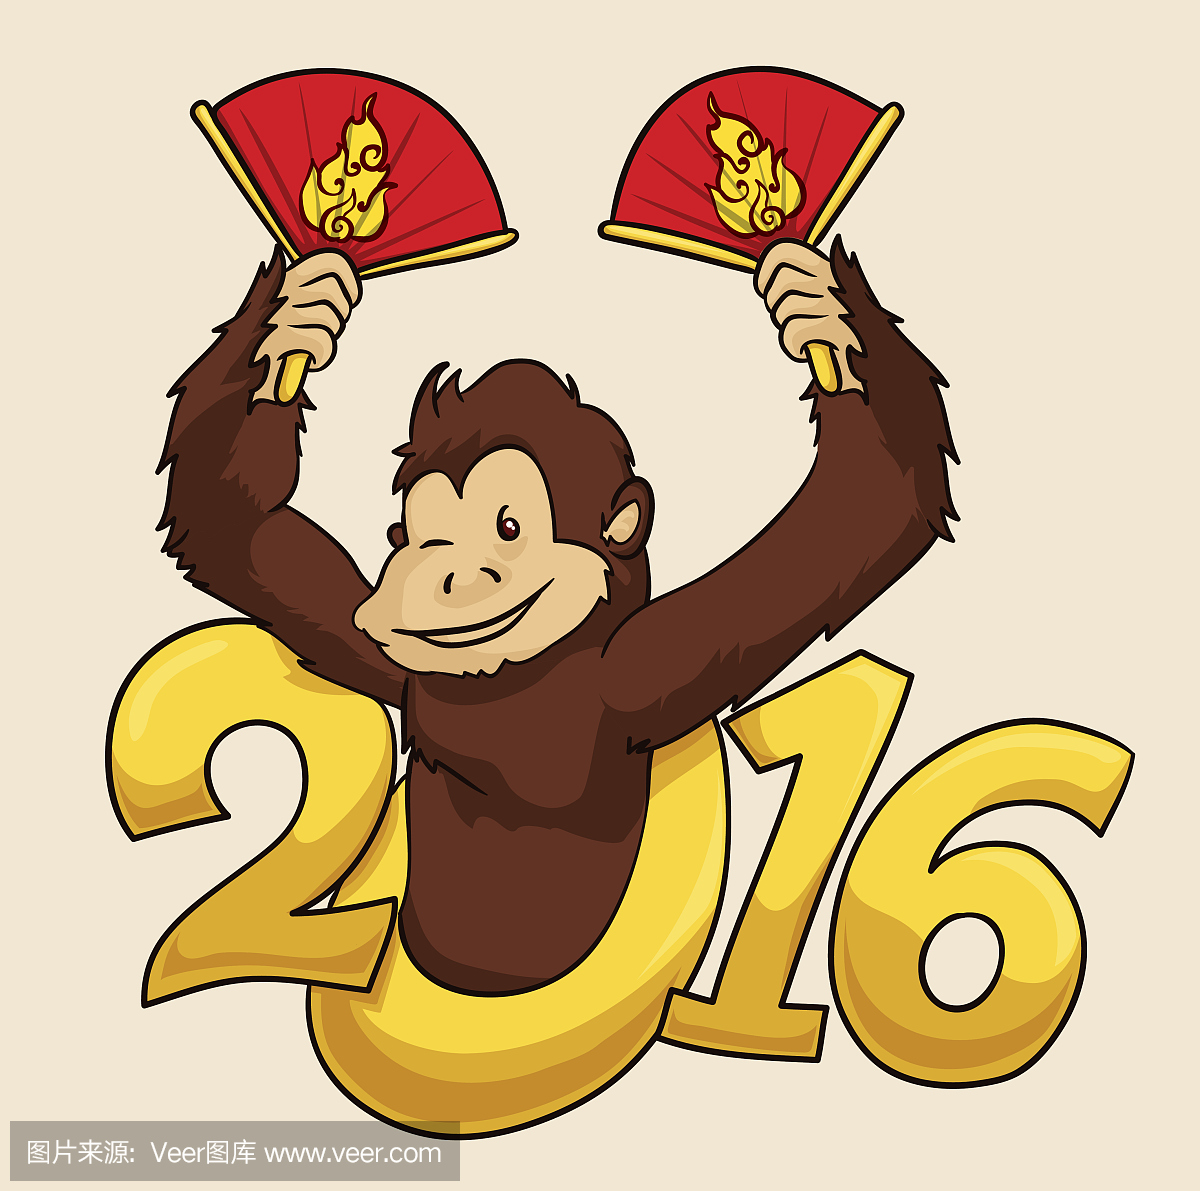 Funny Monkey for Chinese New Year 2016 with